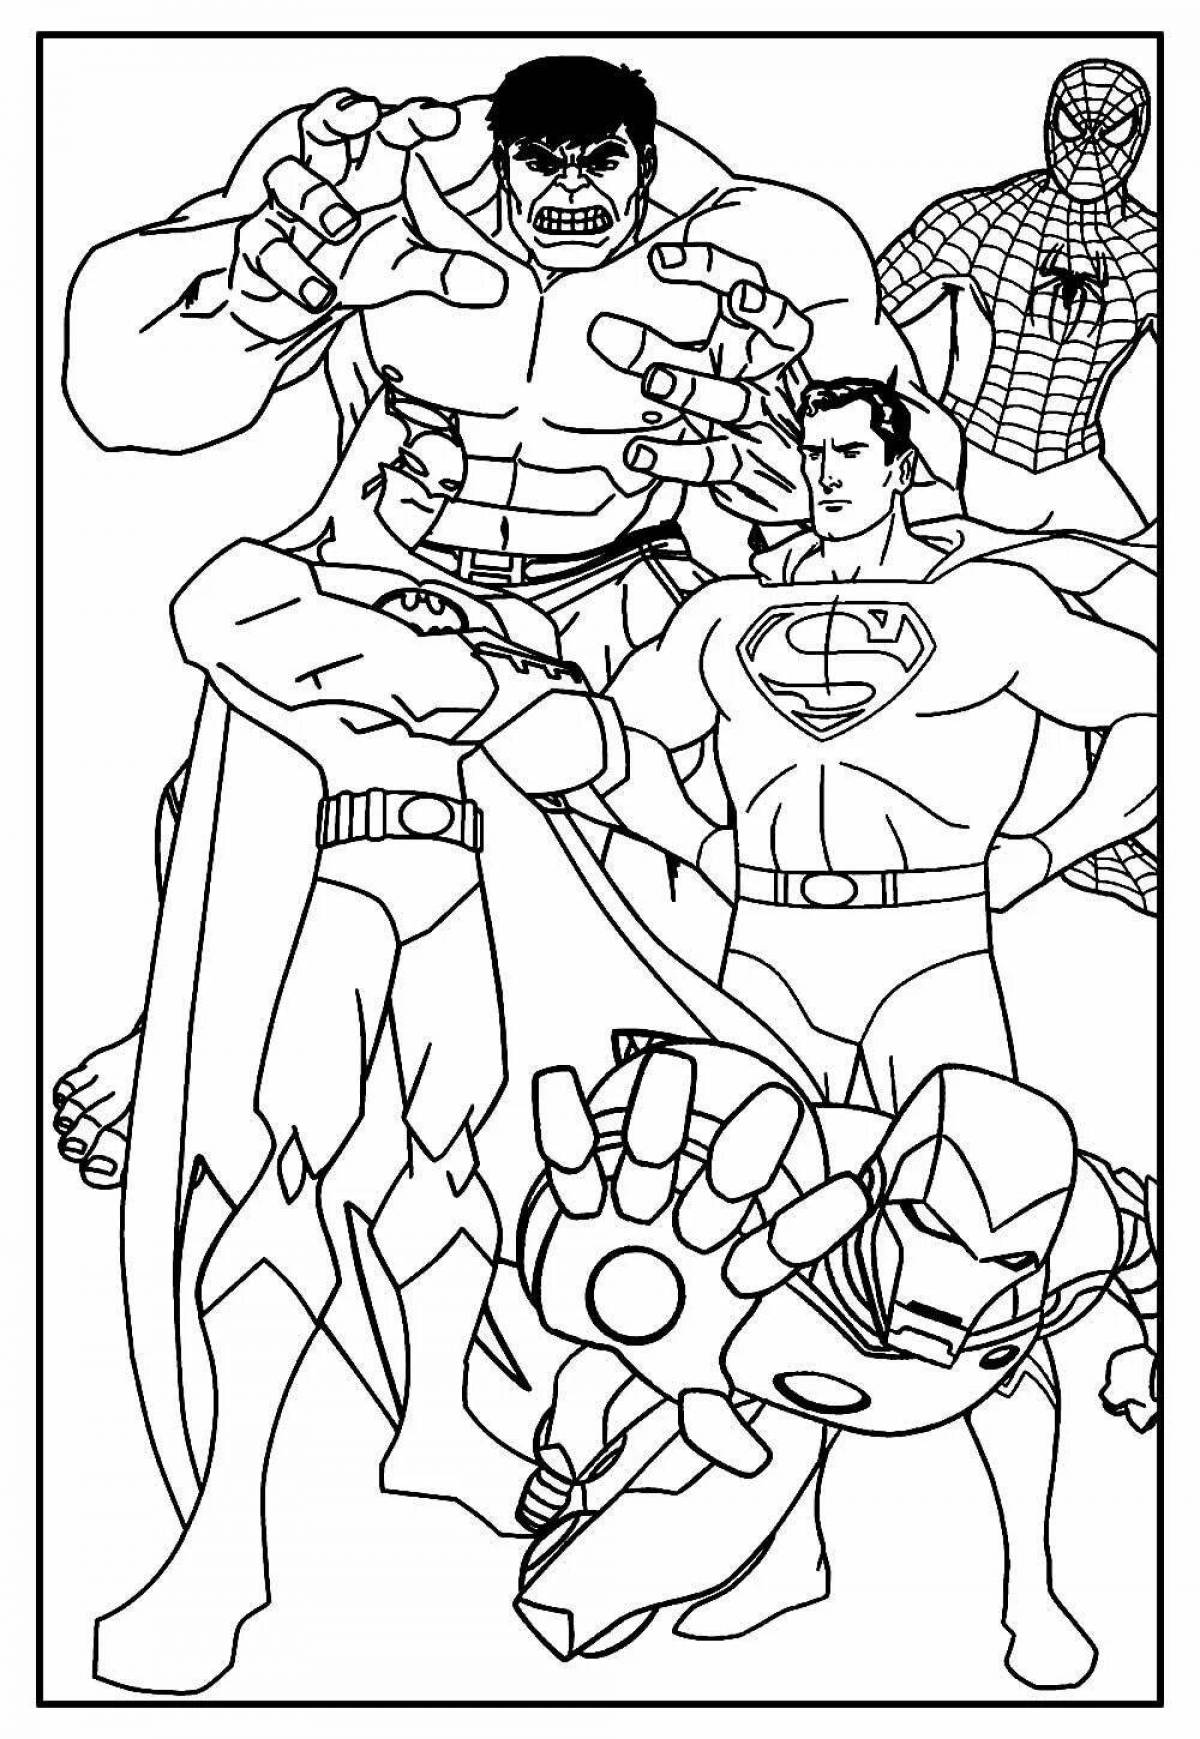 Cute superhero coloring book for 4-5 year olds